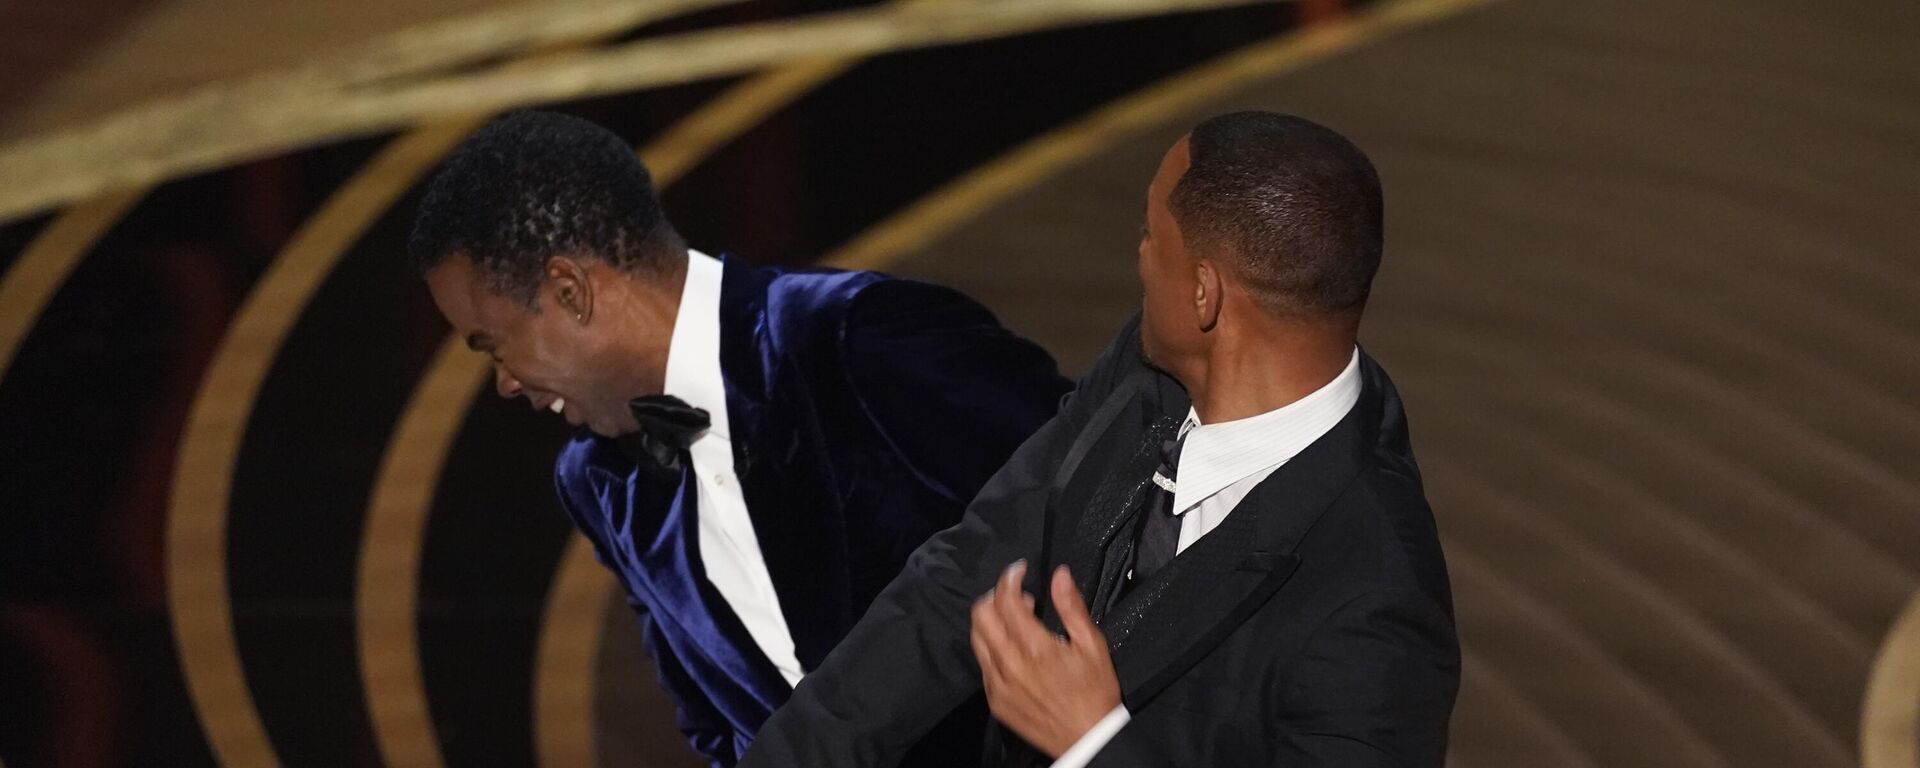 Will Smith, right, hits presenter Chris Rock on stage while presenting the award for best documentary feature at the Oscars on Sunday, March 27, 2022, at the Dolby Theatre in Los Angeles. - Sputnik International, 1920, 24.04.2022